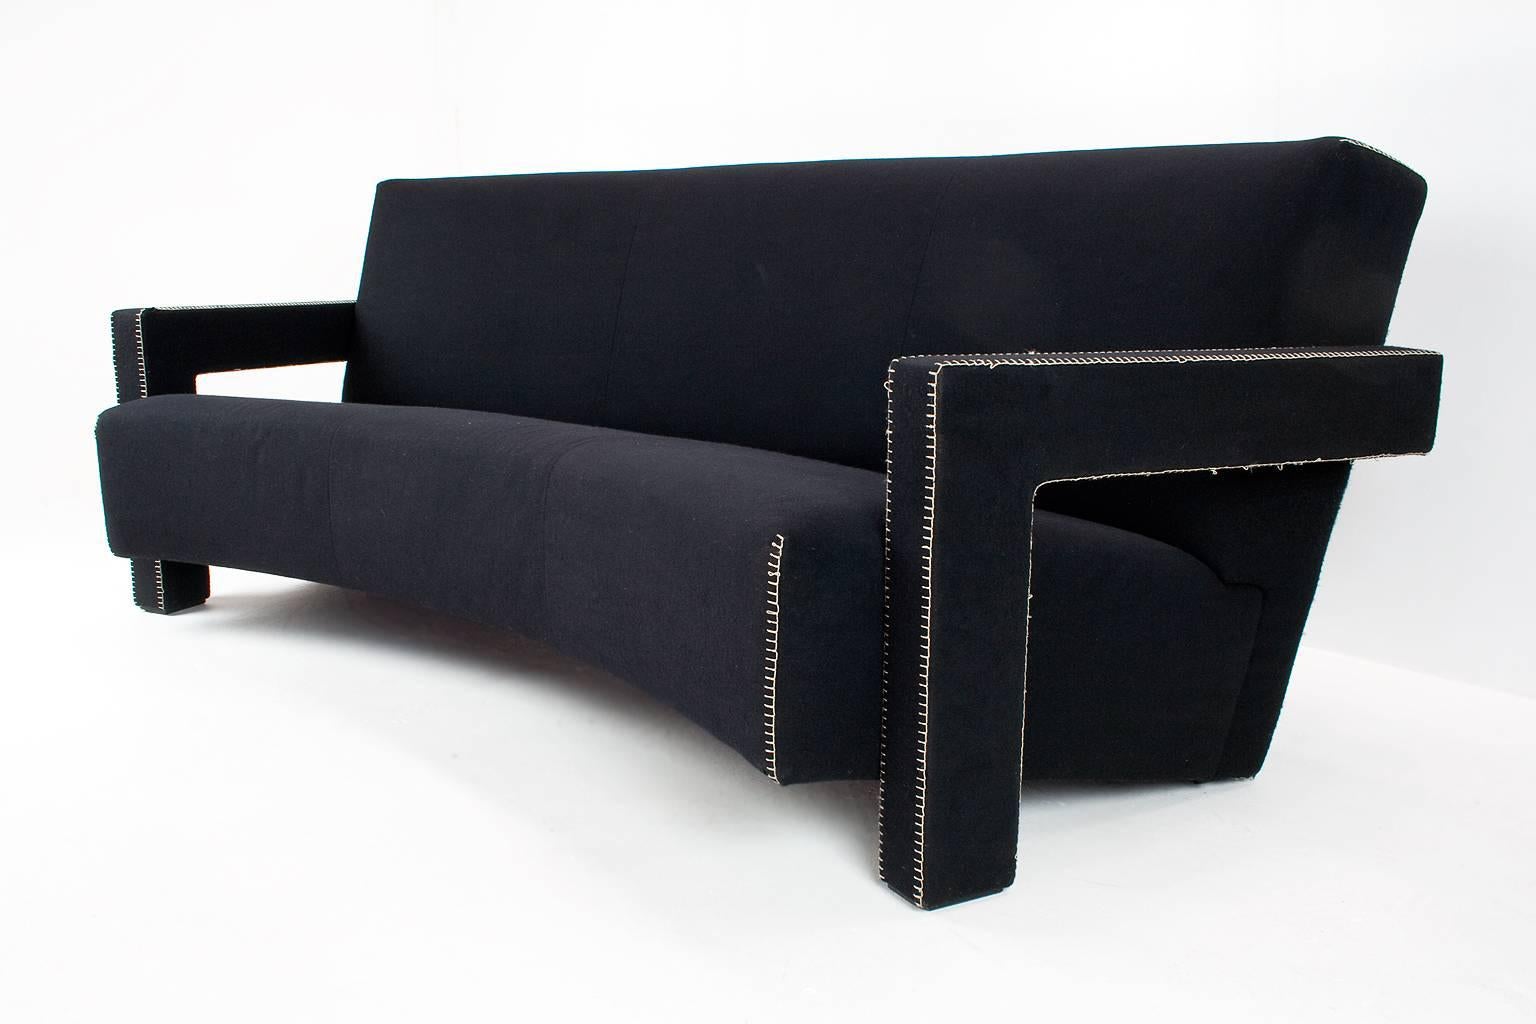 Original festinated 'Utrecht' sofa, in soft black fabric and wood, by Gerrit Thomas Rietveld, the Netherlands, designed 1935. This sofa is numbered 0223 from the Cassina collection 1988-2011.

This sofa has it's original black upholstery with